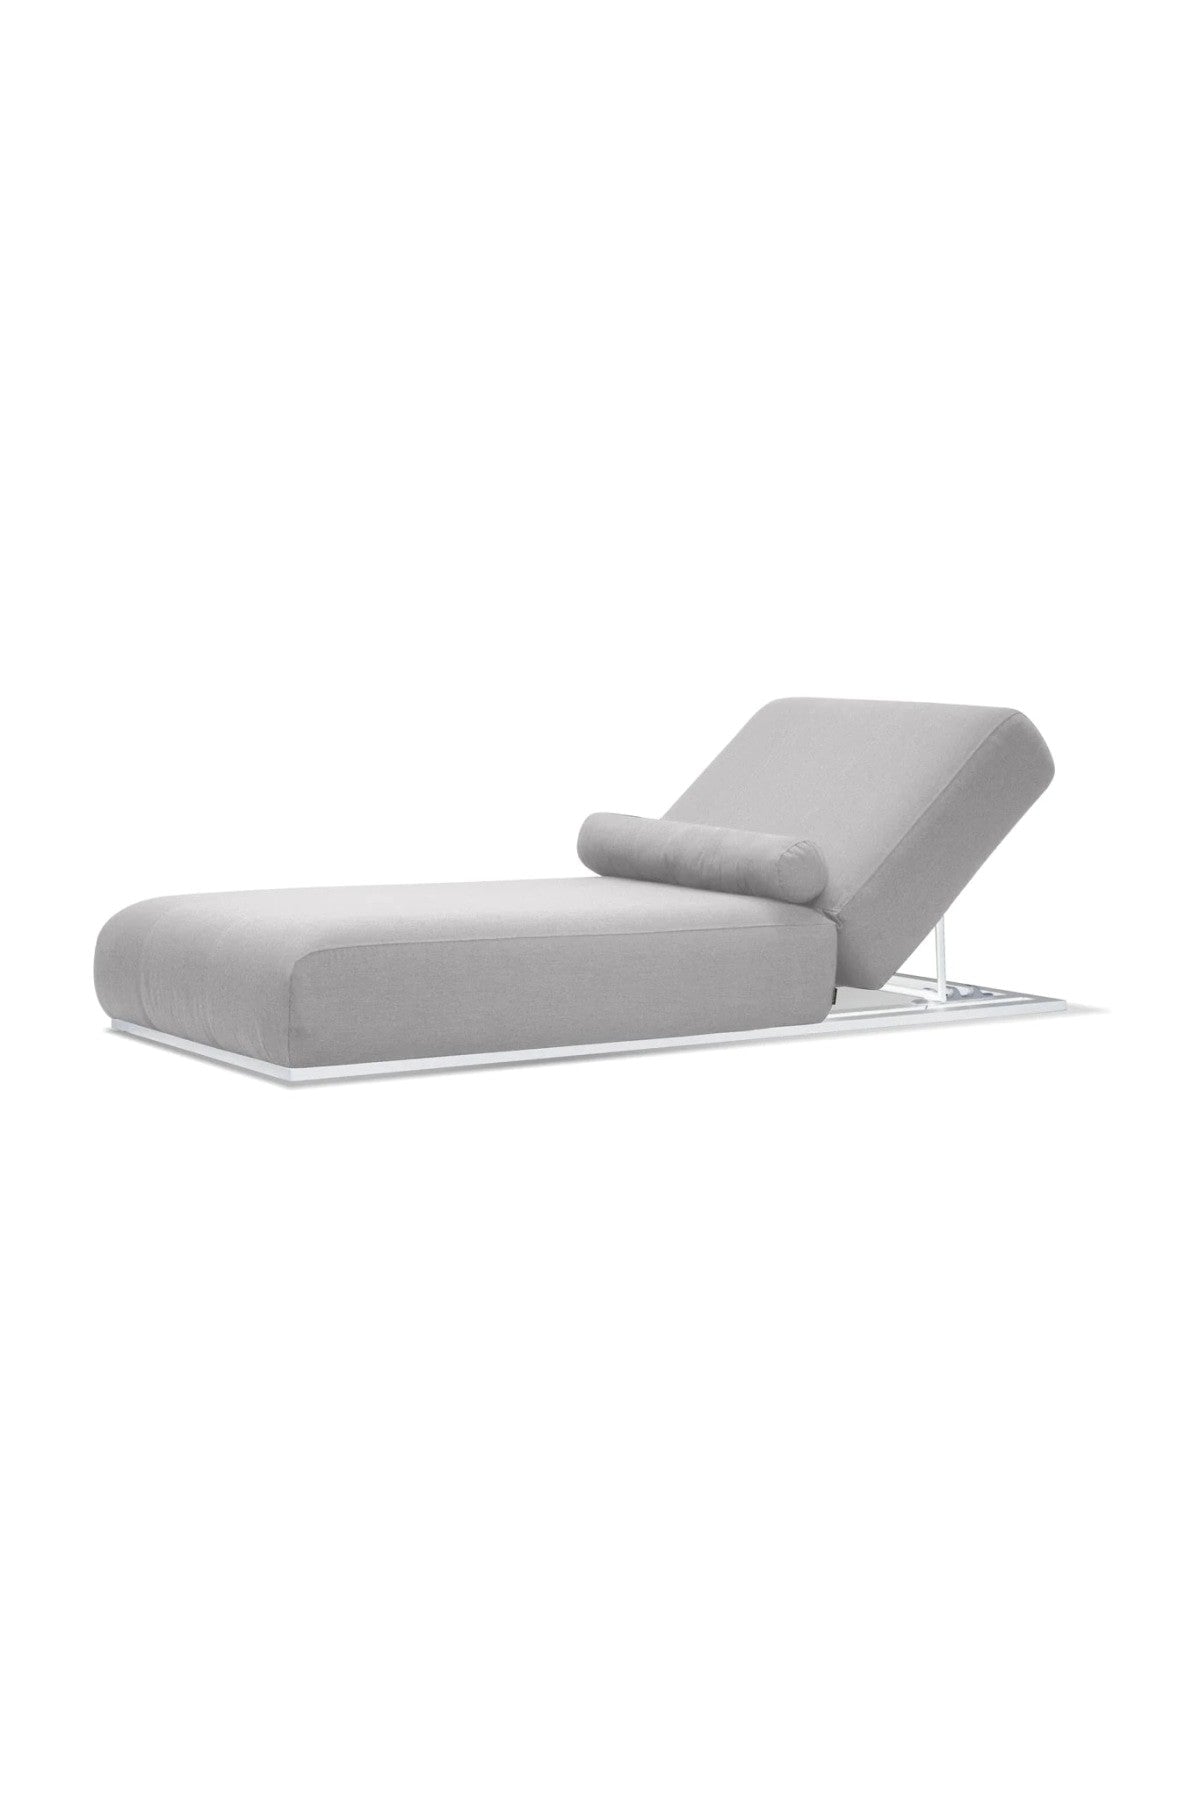 Bondy Outdoor Chaise Lounge